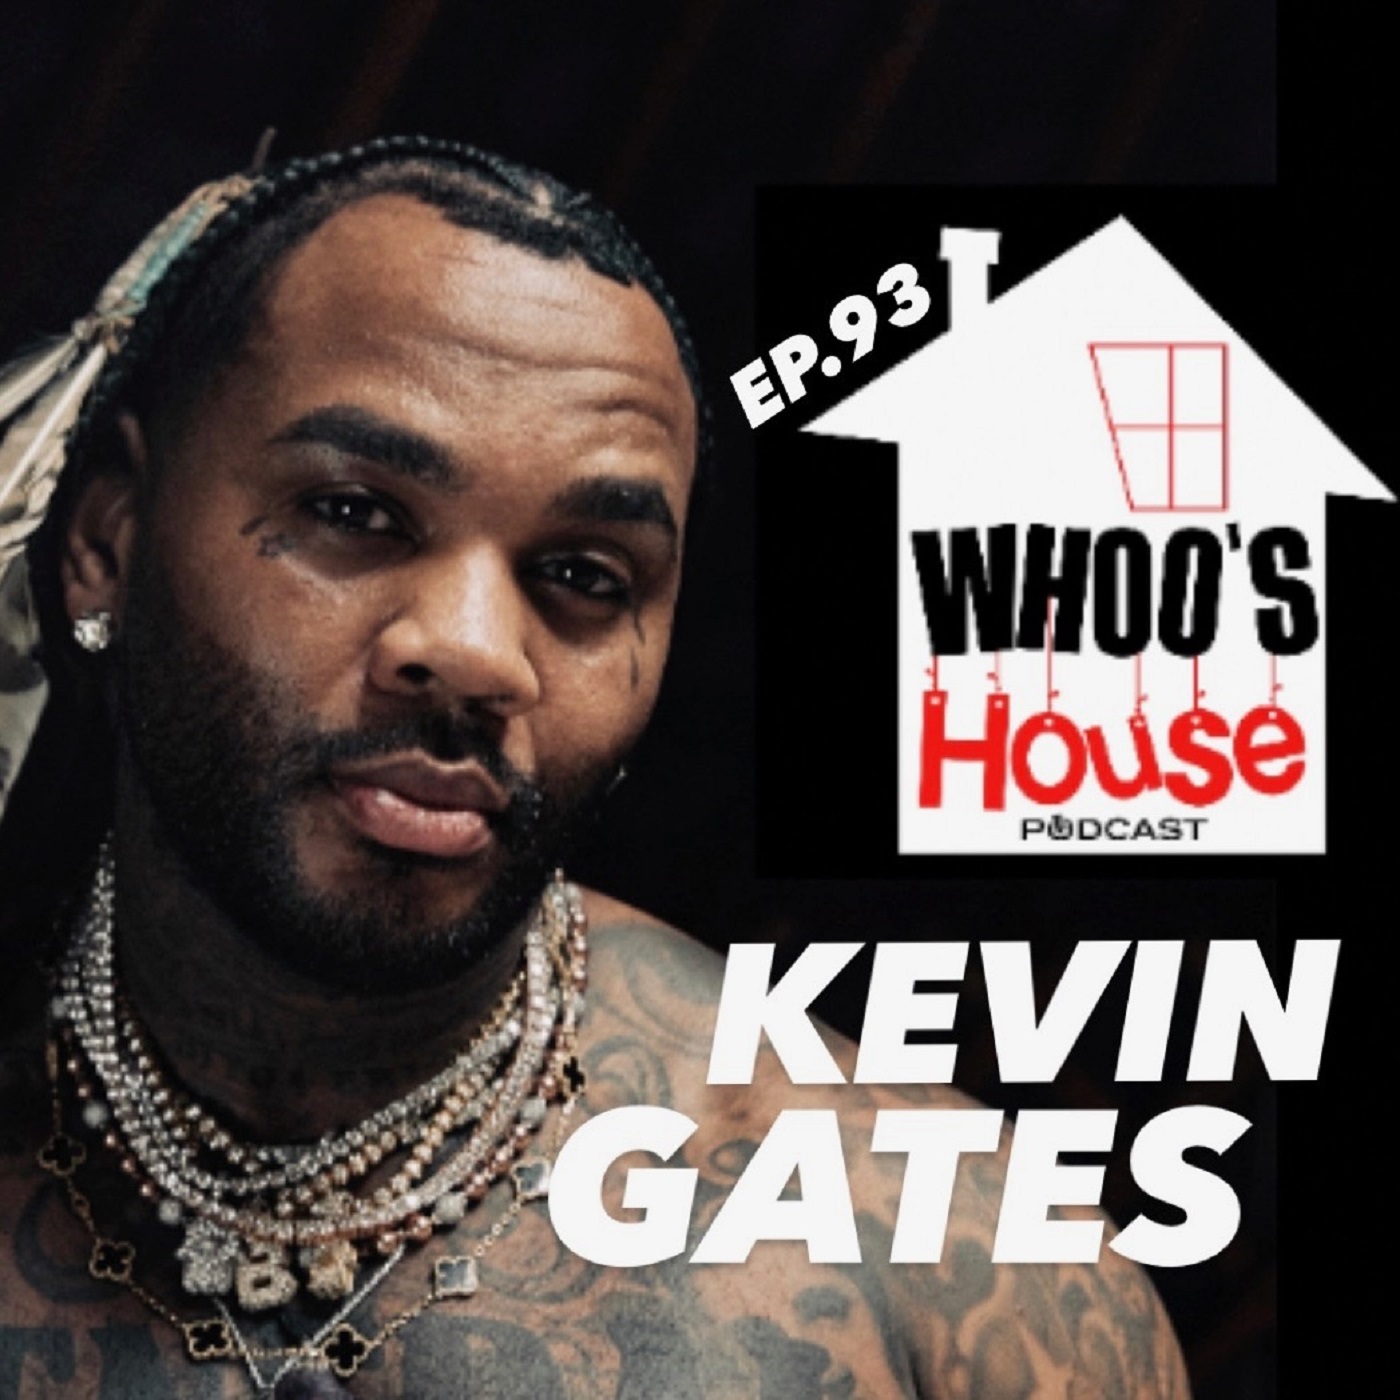 EP 93 Kevin Gates speaks on Beyoncé and senseless violence in our communities 